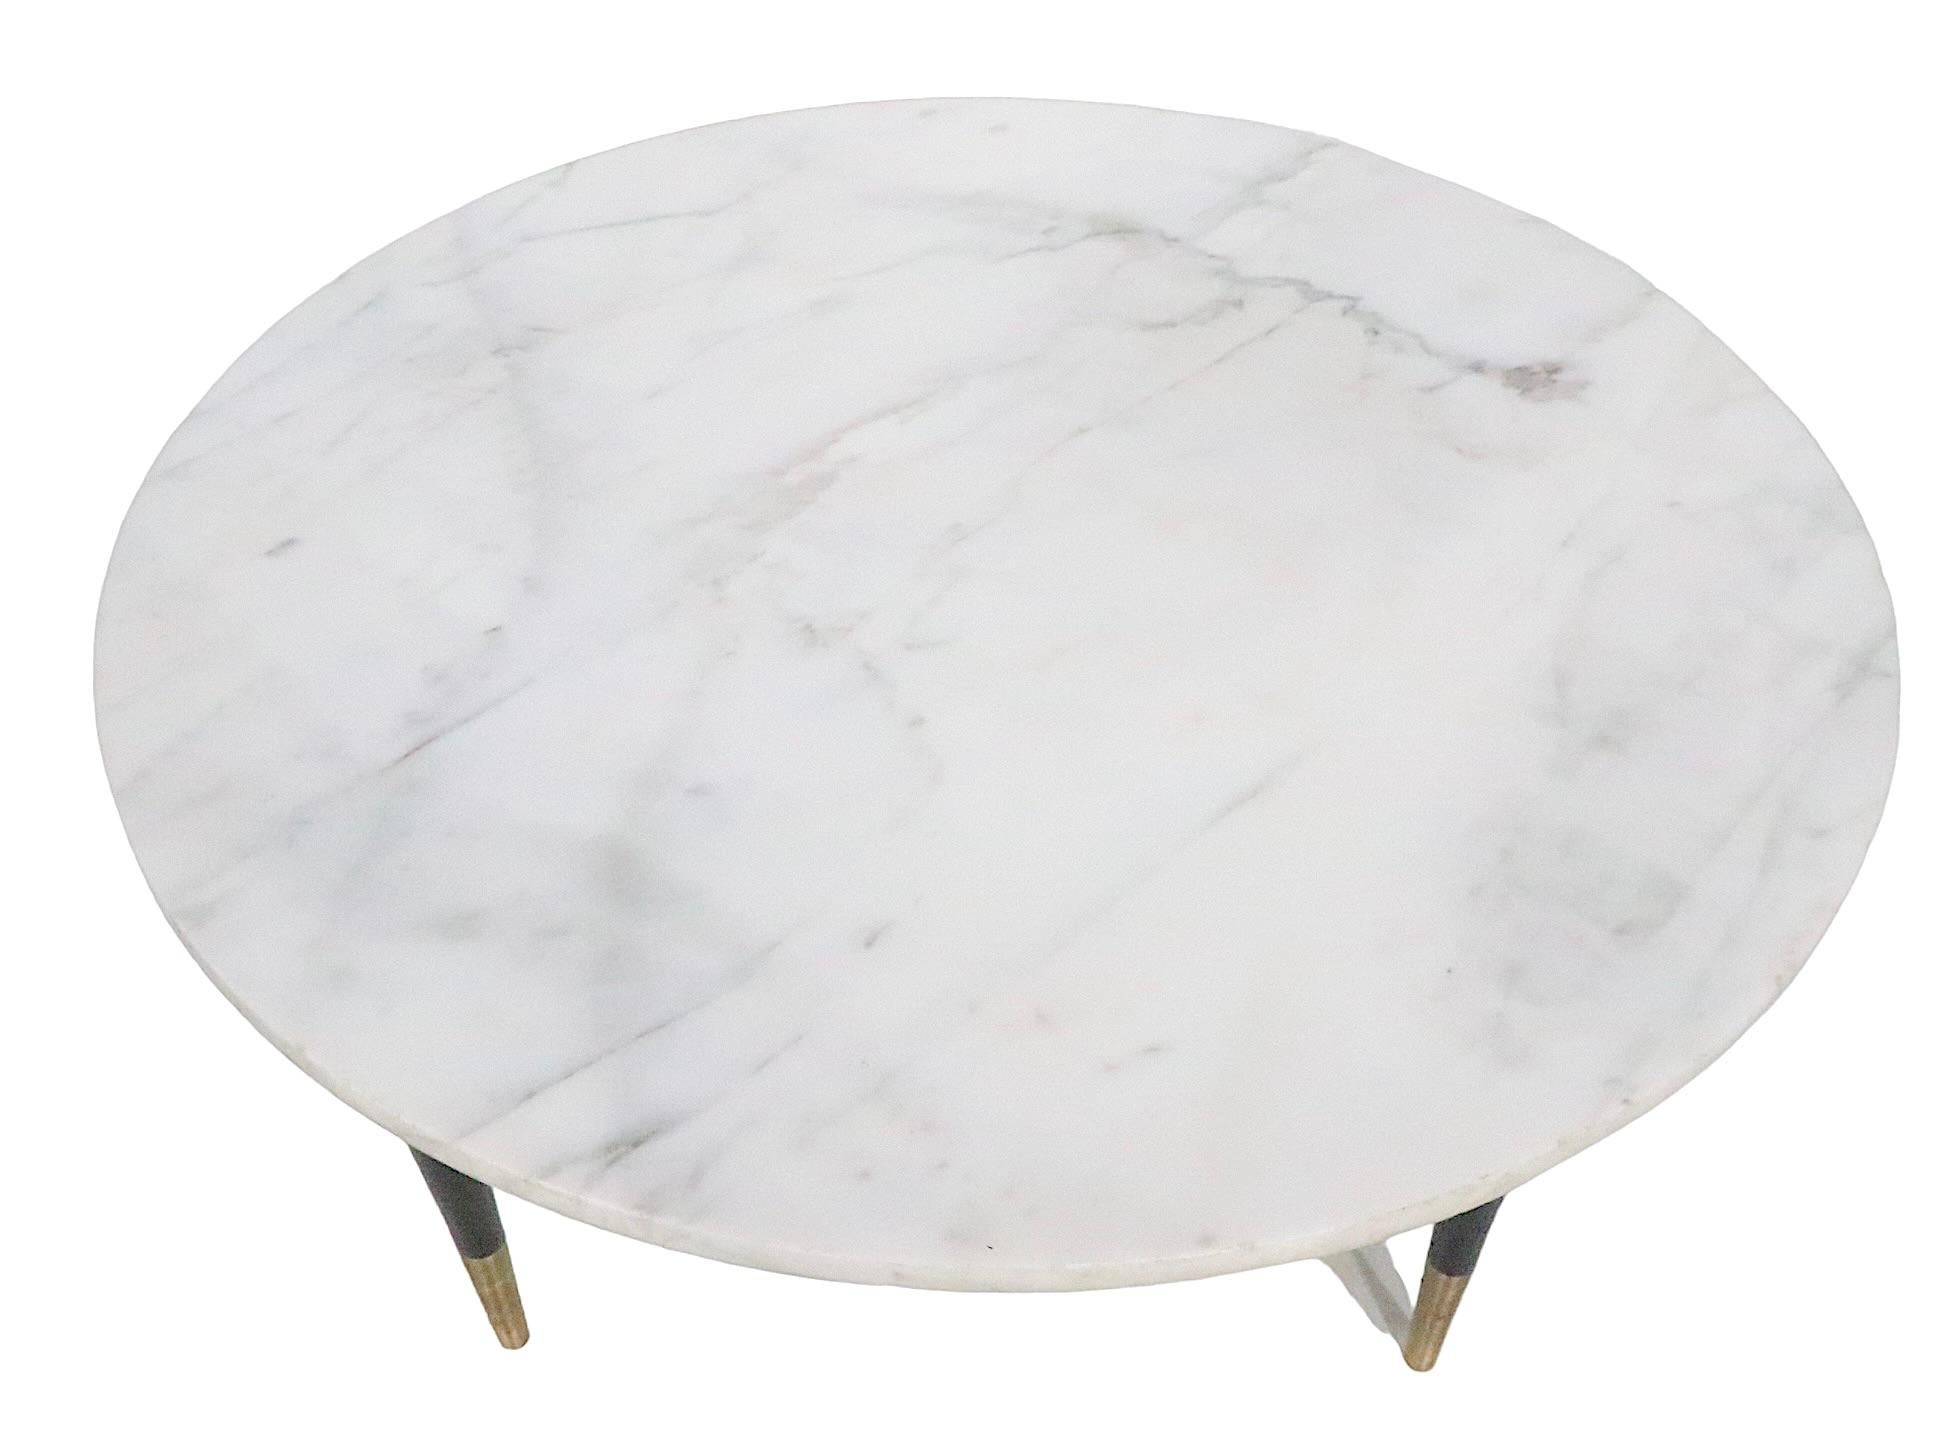 Black and White Mid Century Marble Top Coffee Cocktail Table, circa 1950/1960s For Sale 3